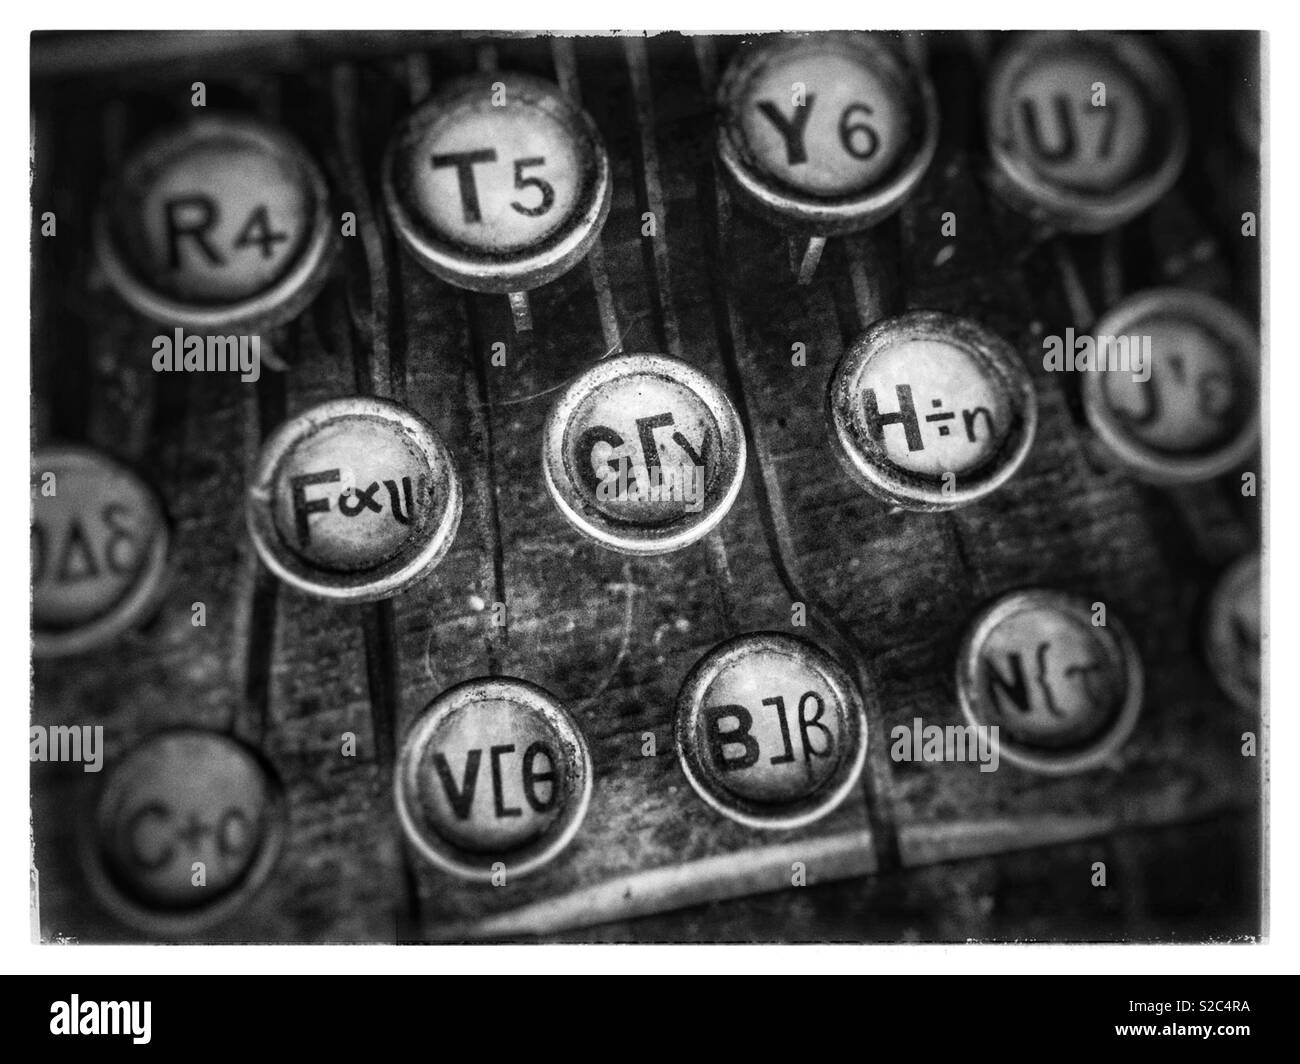 Vintage folding typewriter keys with distressed grungy look Stock Photo